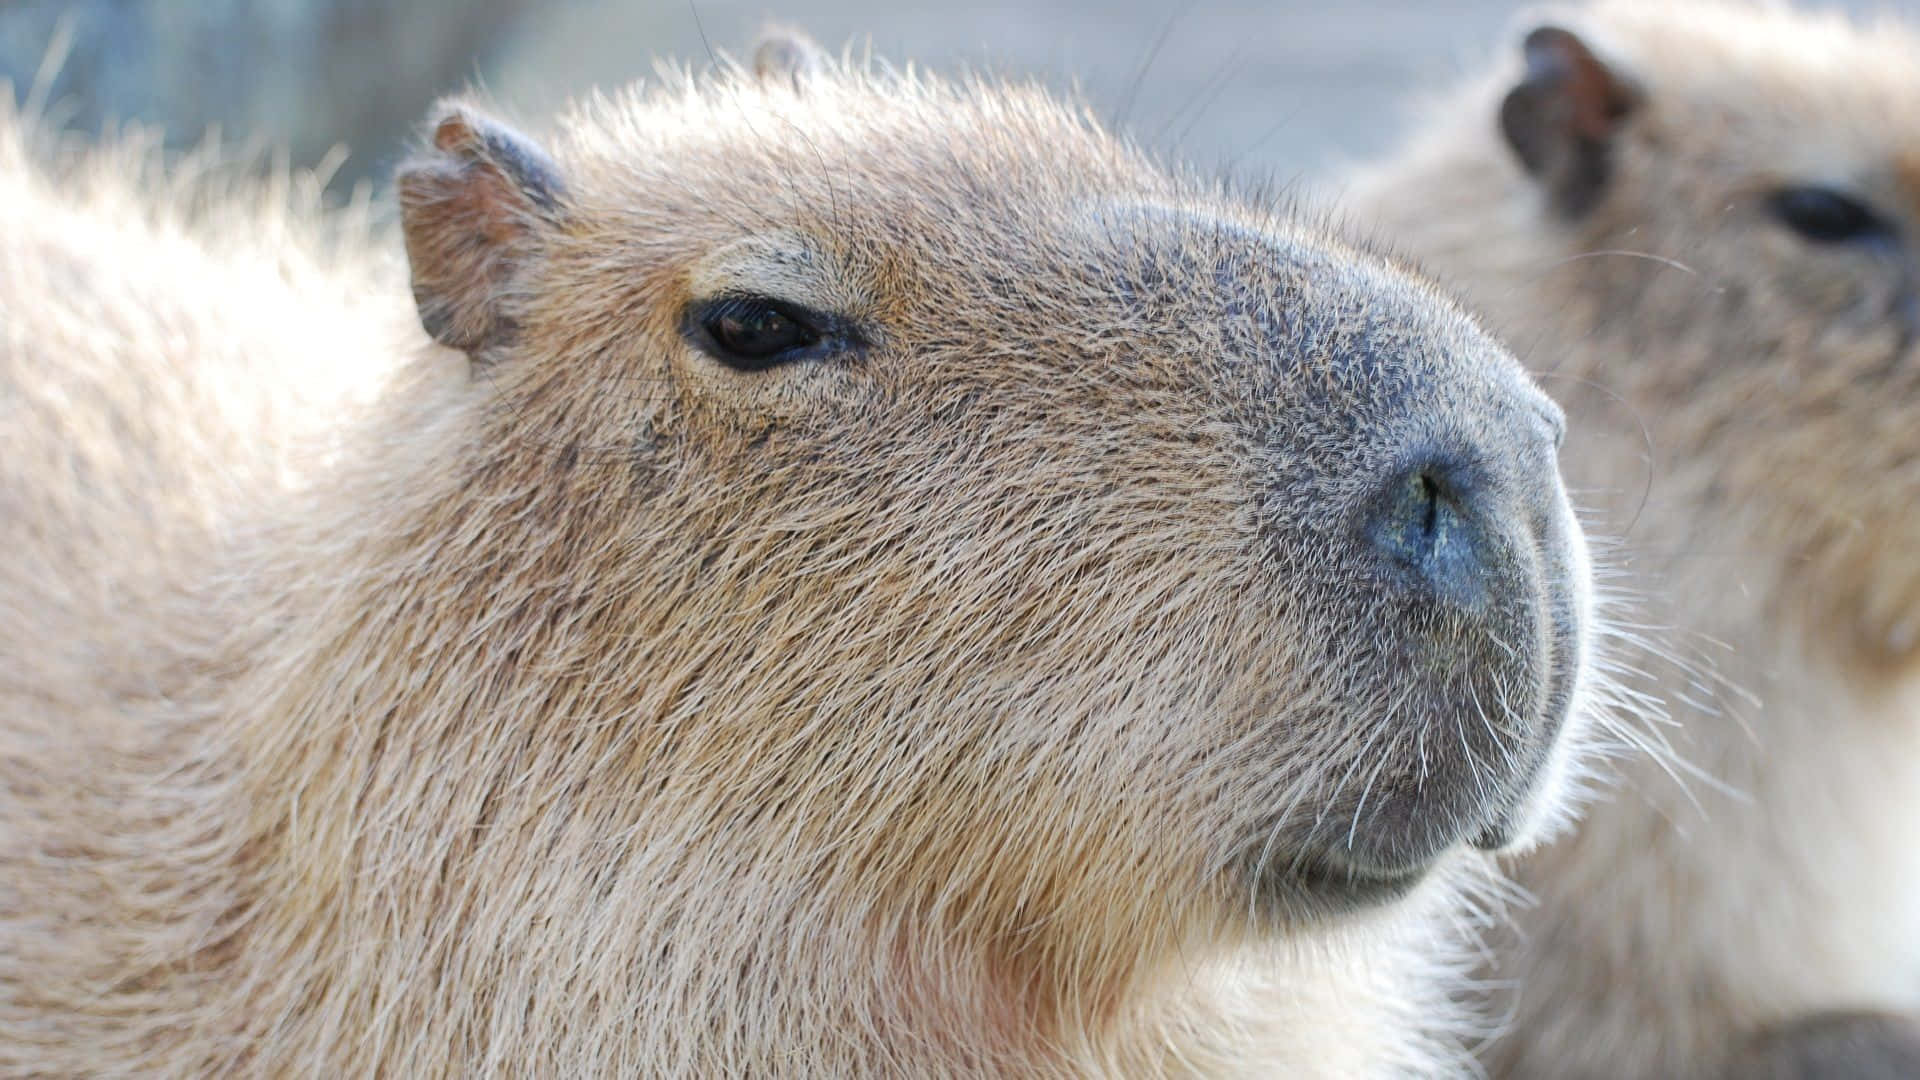 A close up of a capybara sitting on the grass